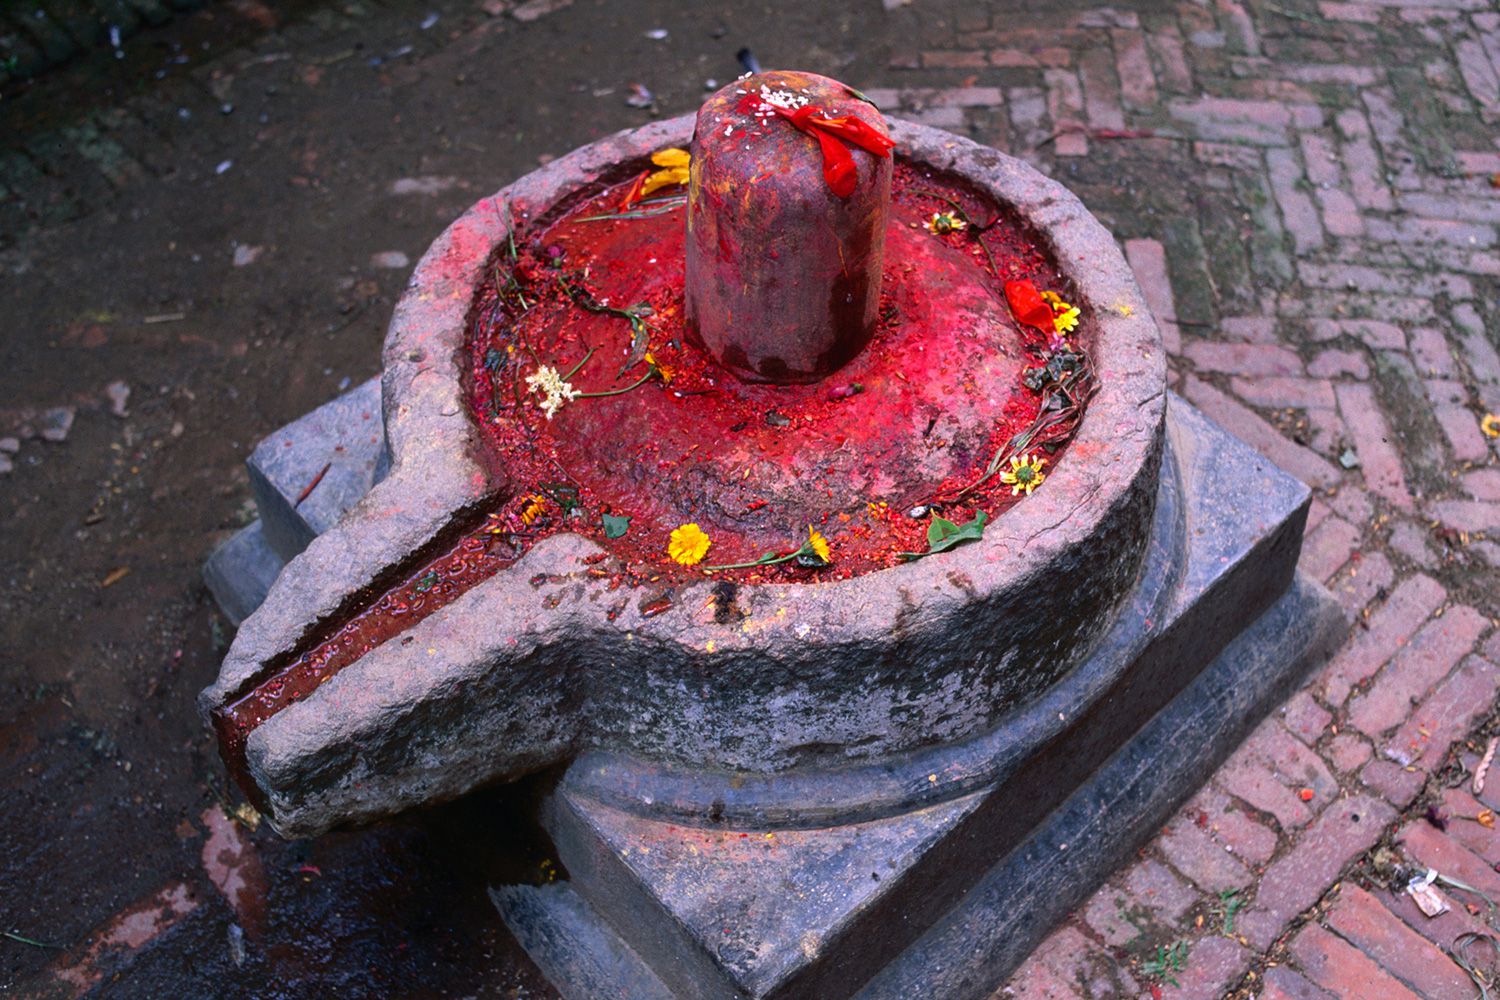 The Real Meaning of Shiva's Linga Symbol